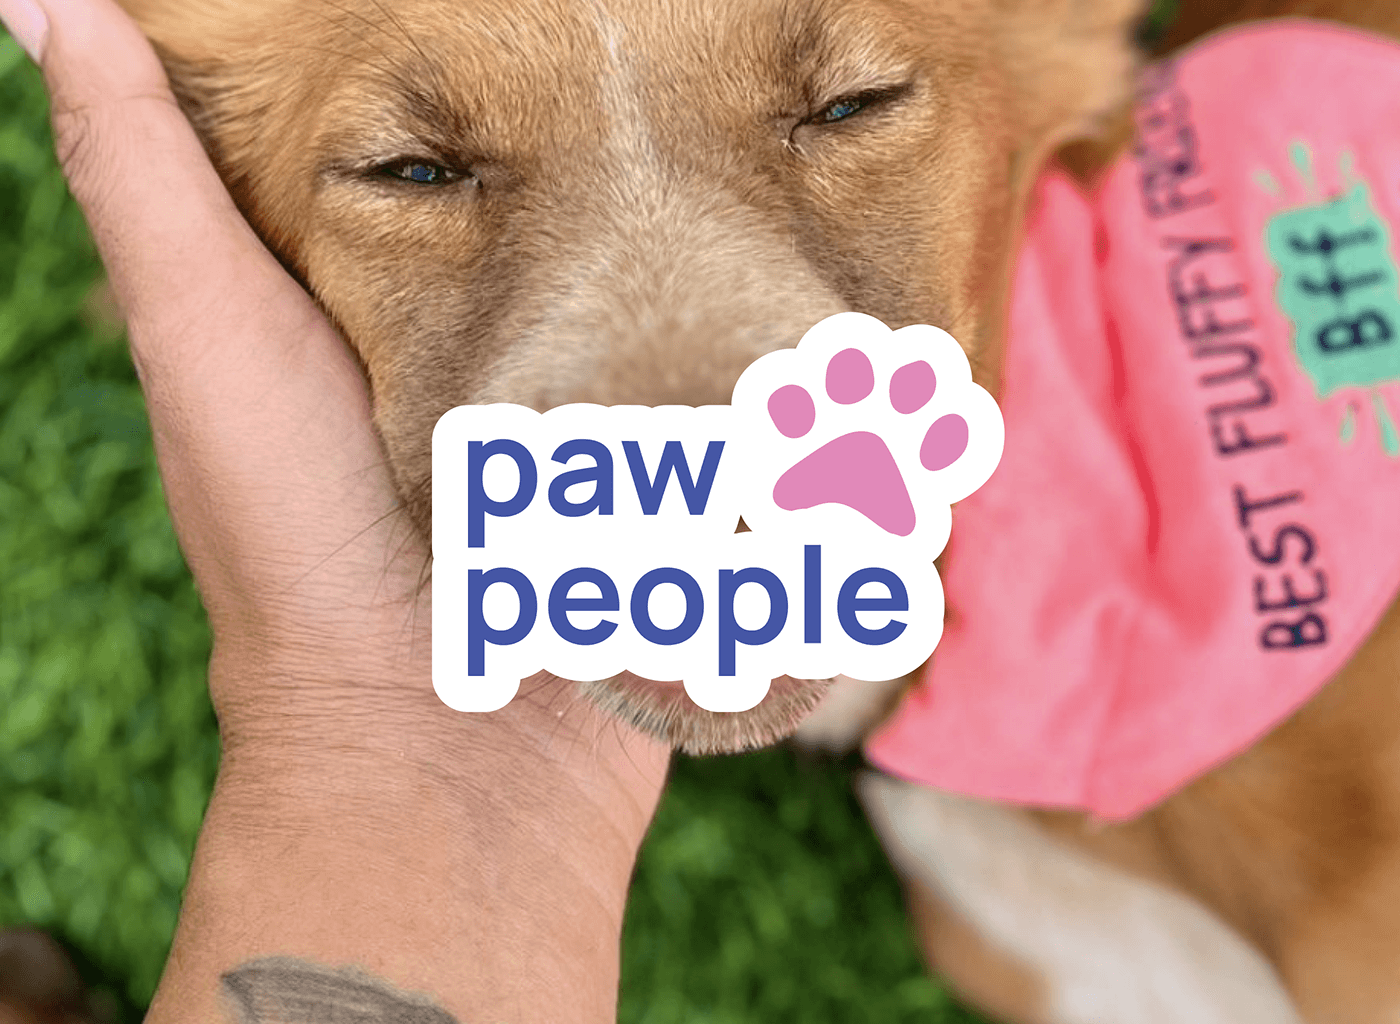 Paw people logo design in purple and pink on a photo of a dog